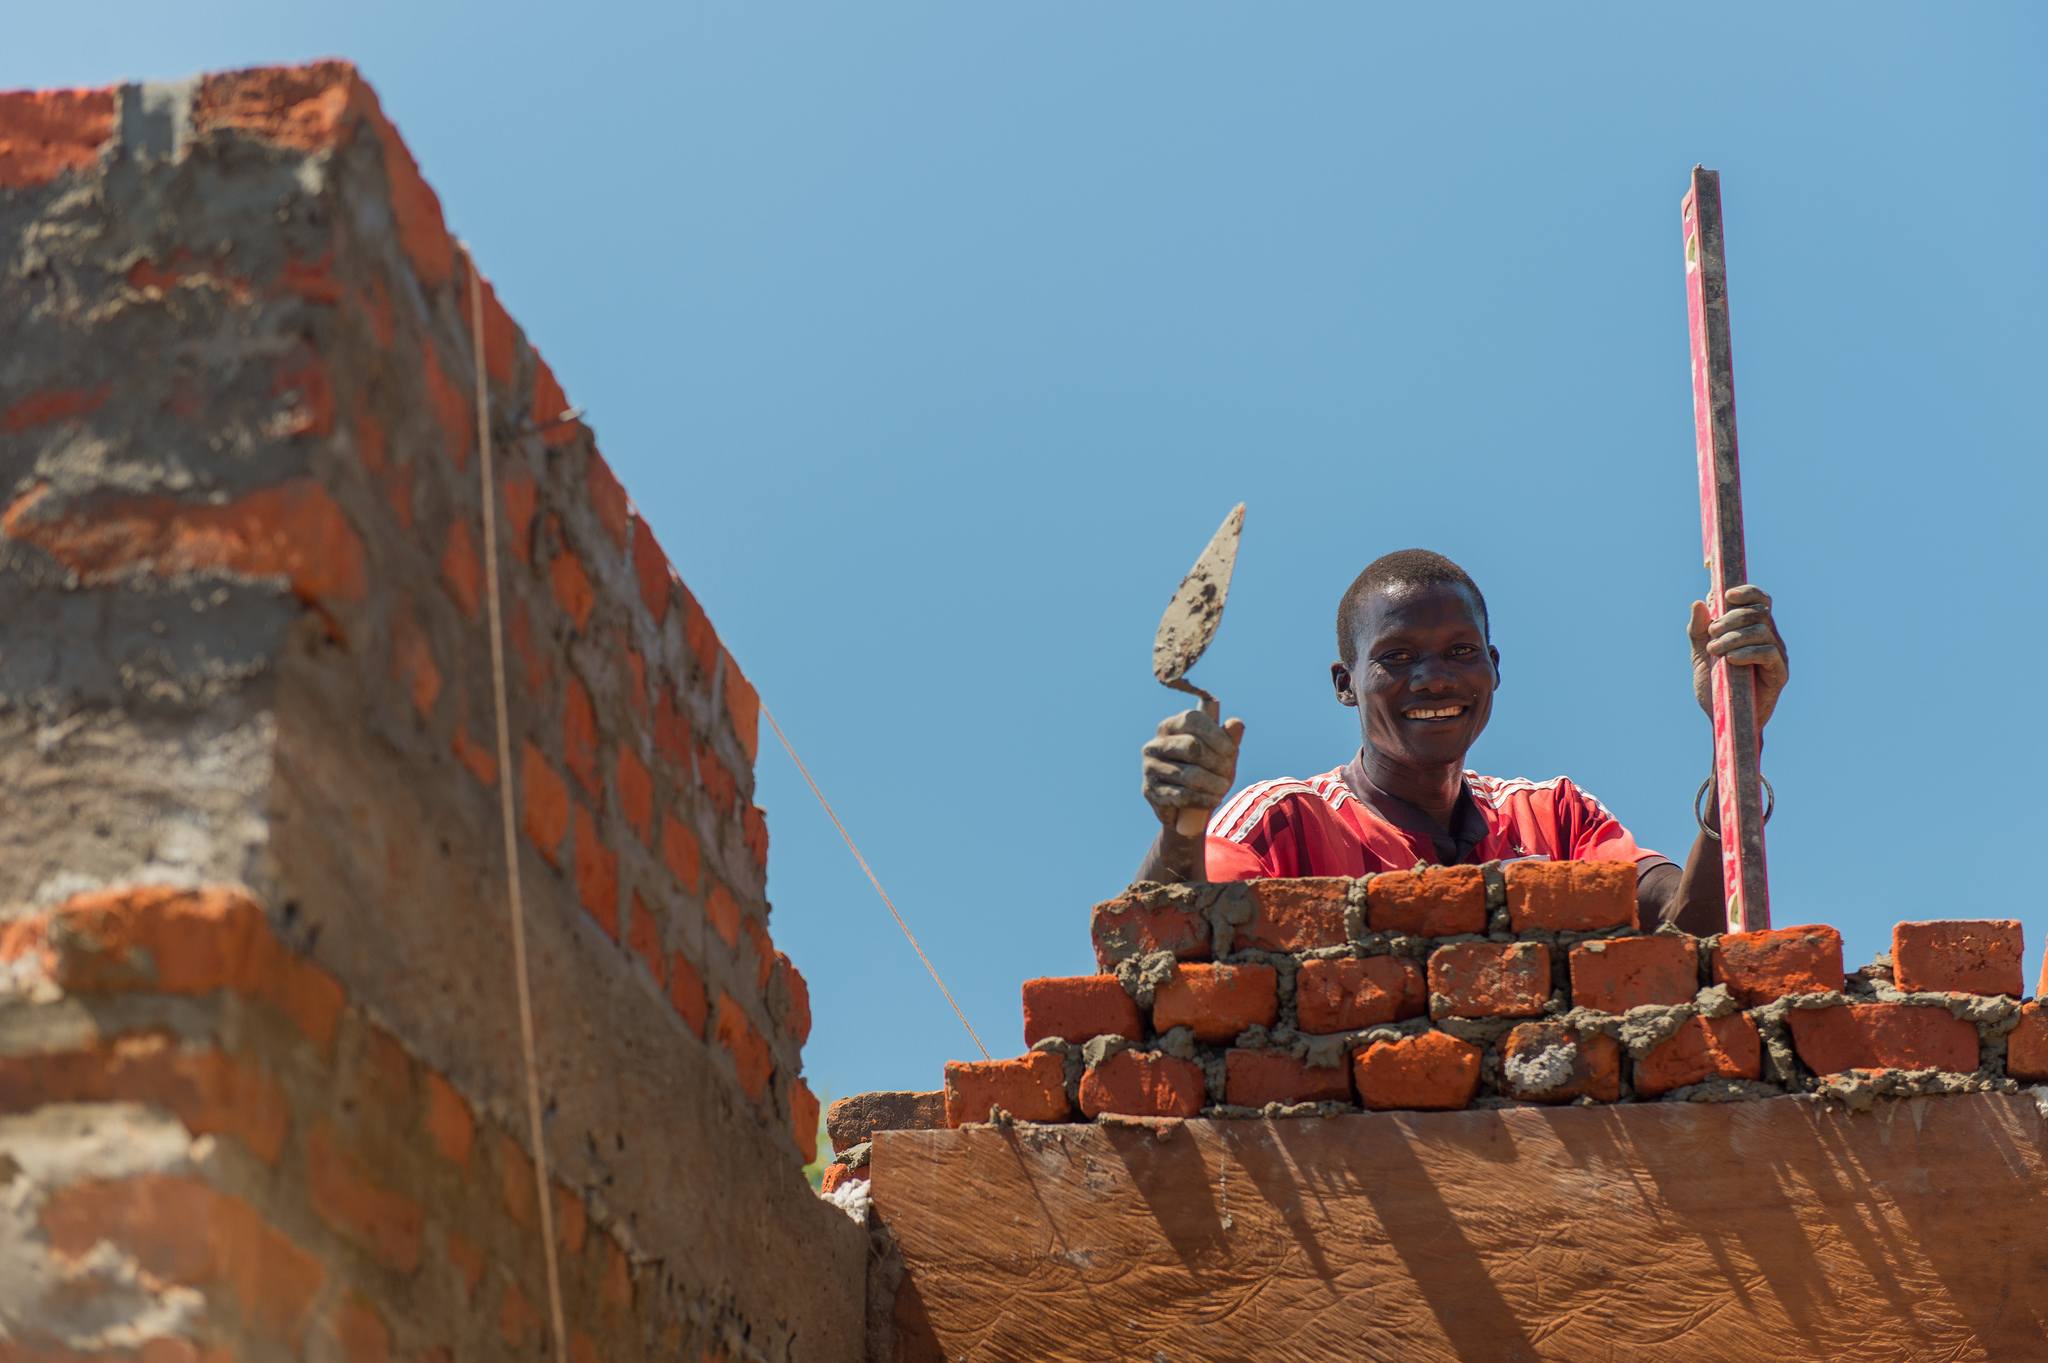 Hard work and many smiles have been put into construction at the site